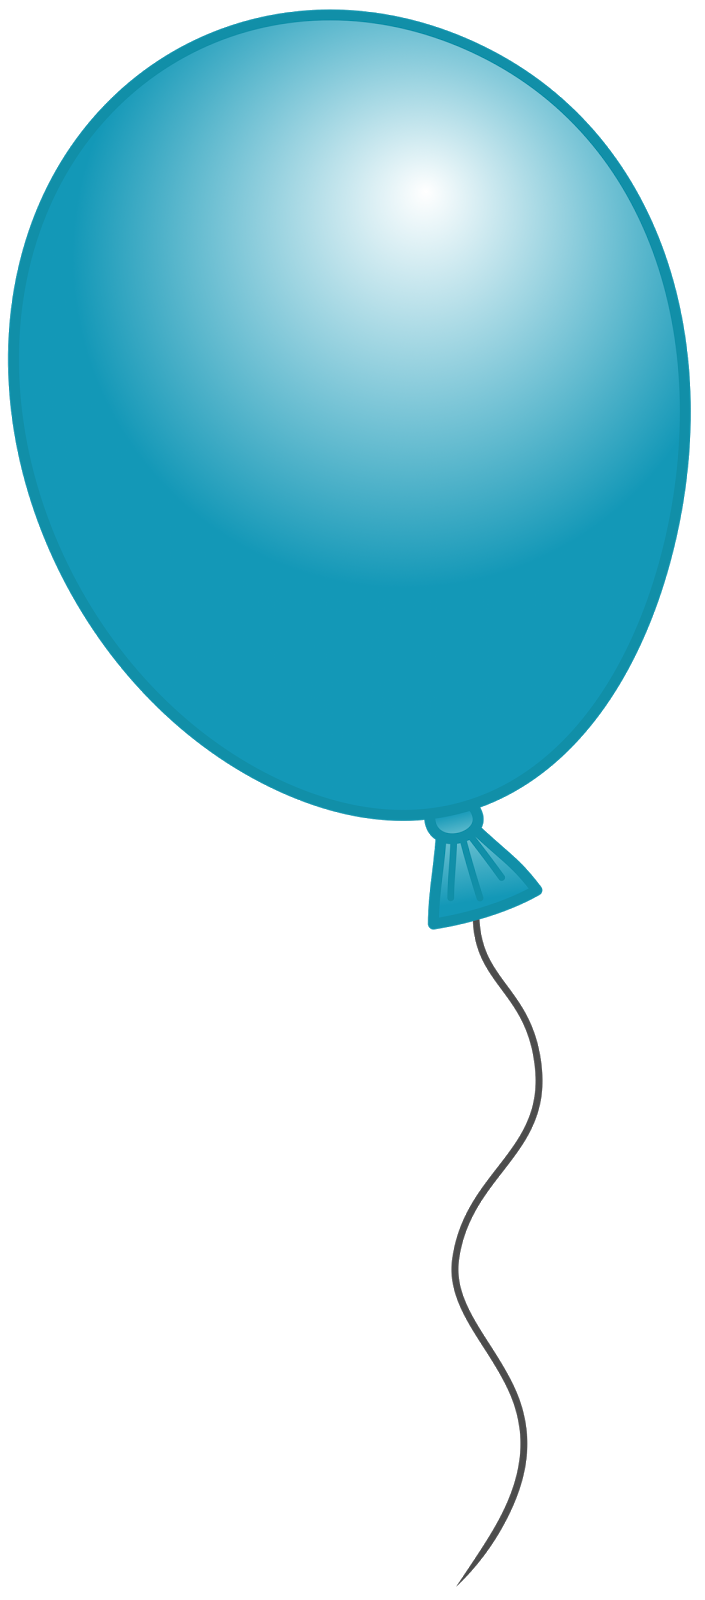 Free Balloons Cliparts, Download Free Balloons Cliparts png images